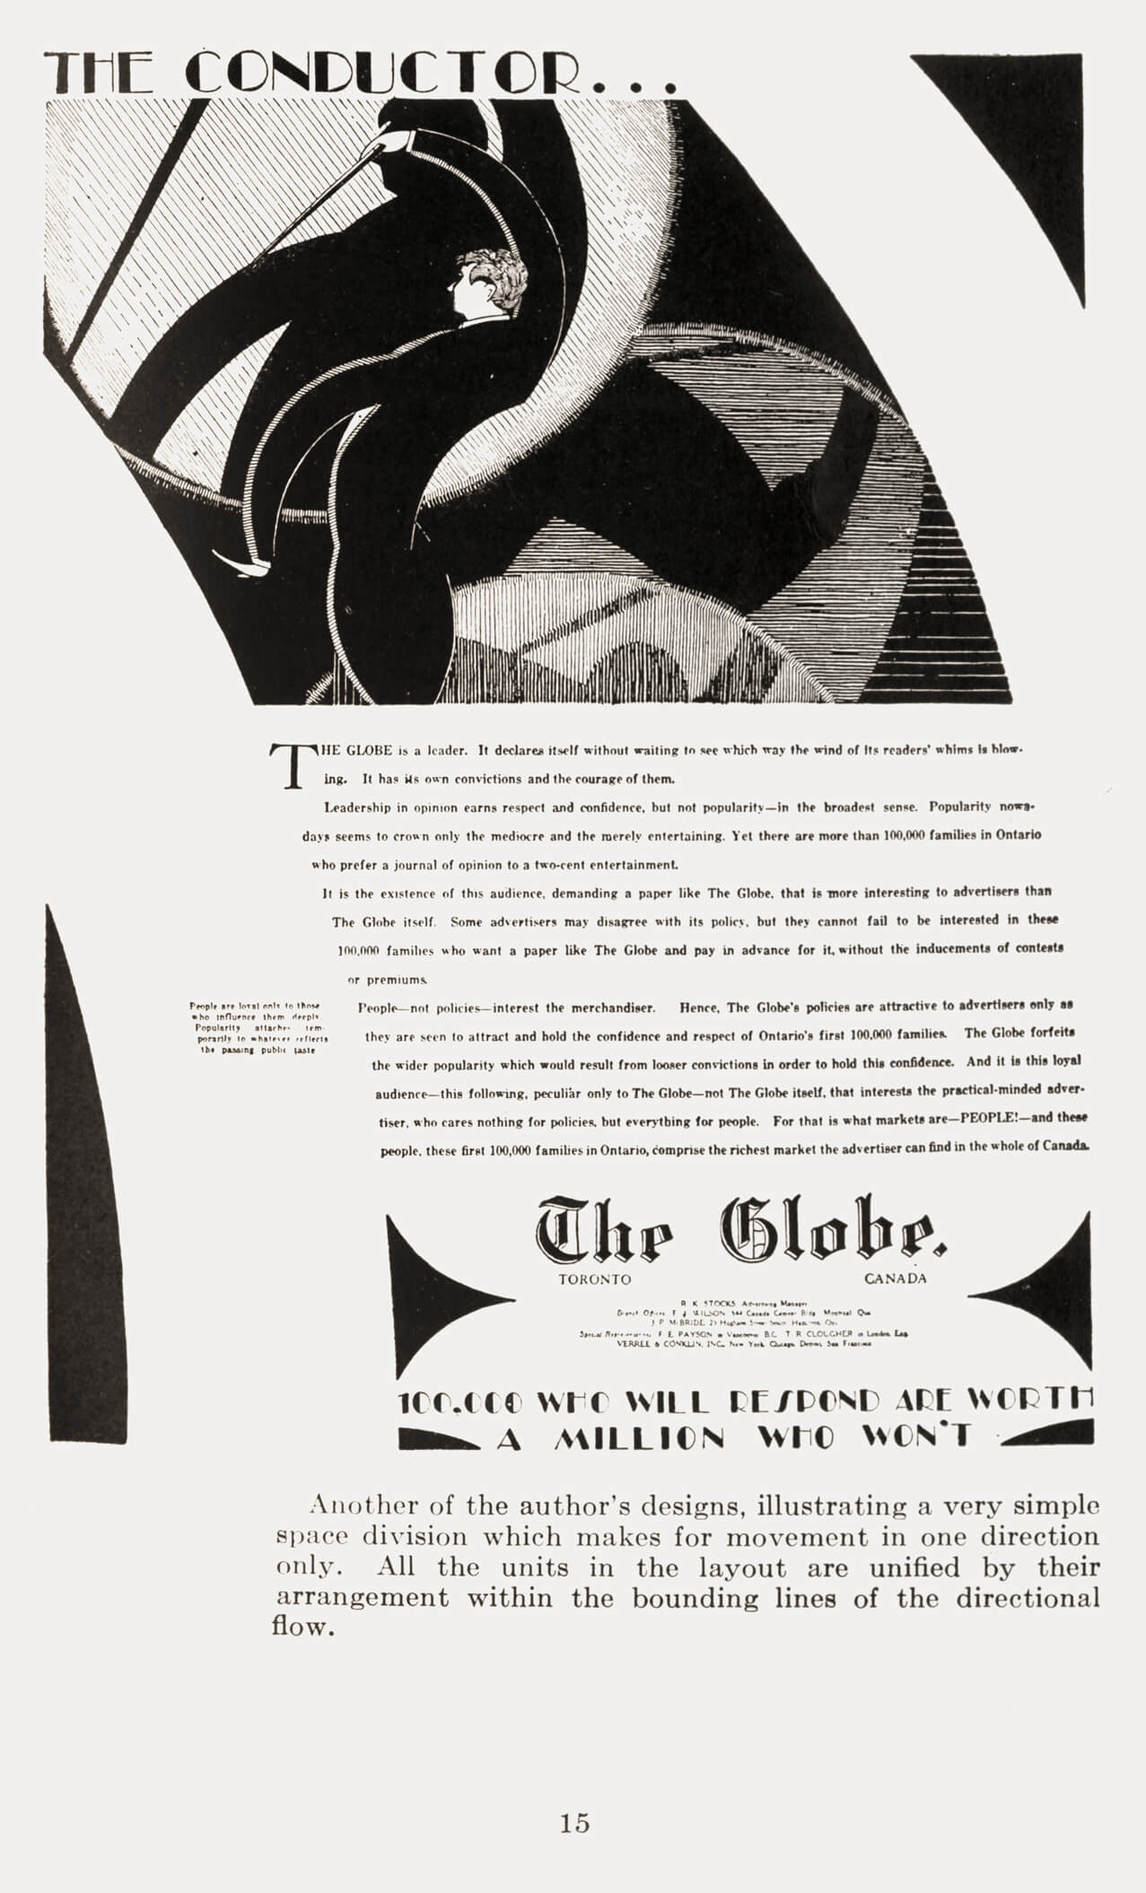 Art Canada Institute, Bertram Brooker, Advertisement for The Globe, “The Conductor,” published in Brooker, Layout Technique in Advertising (1929)